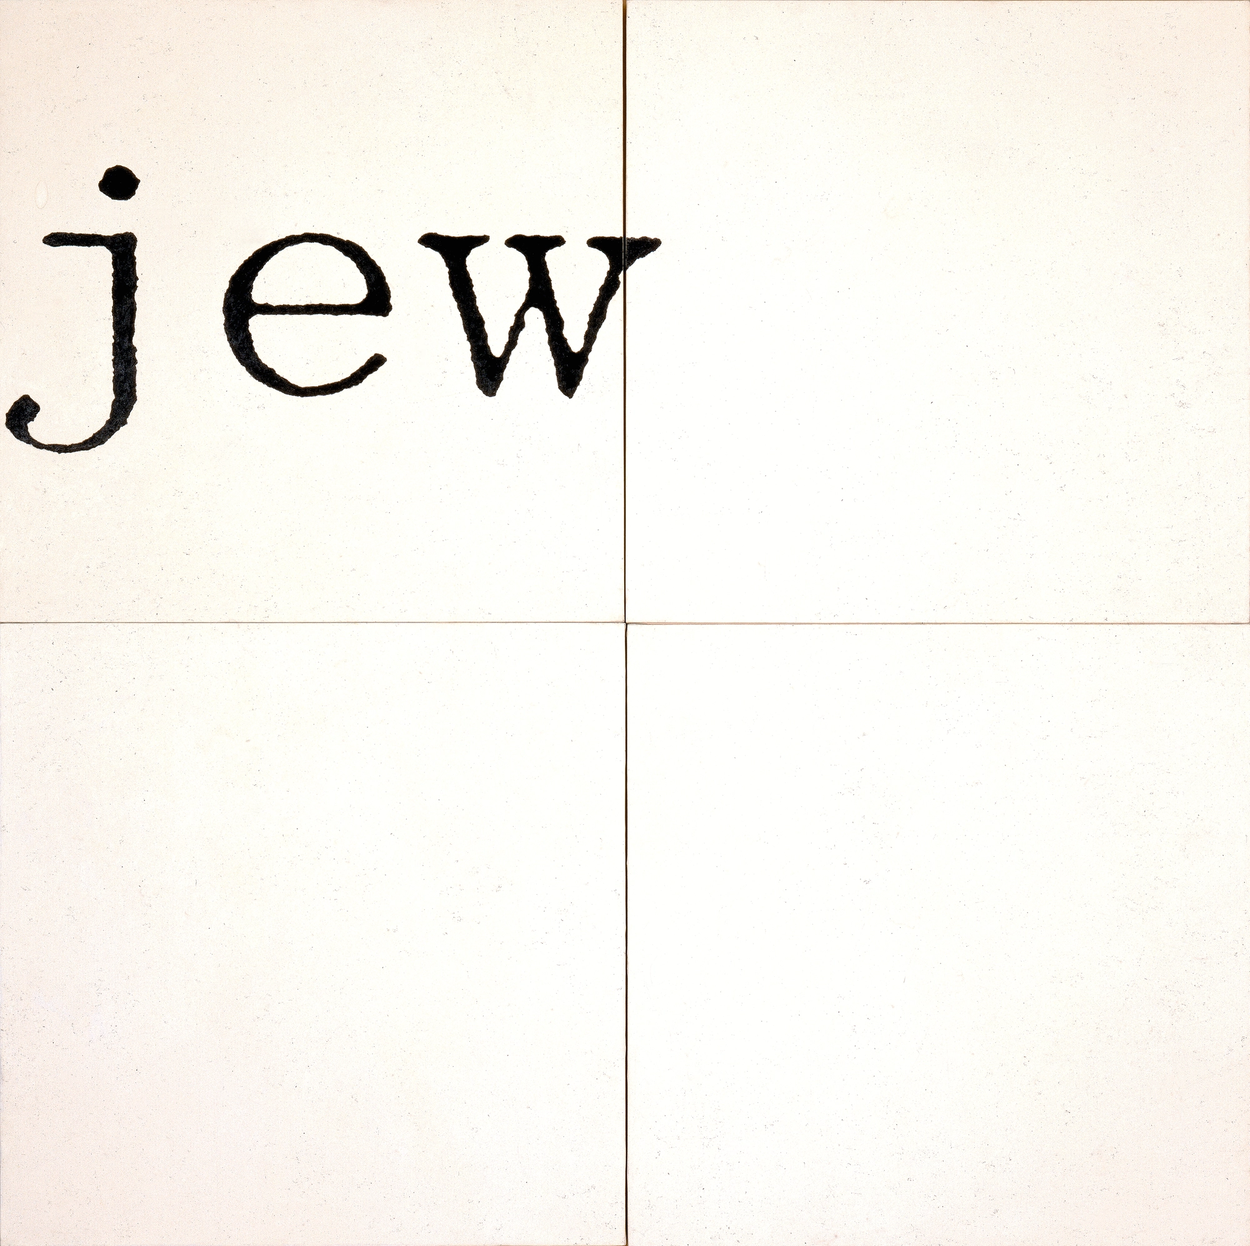 Jewish Museum, New York, Gift of the artist, 1987-115a-d.